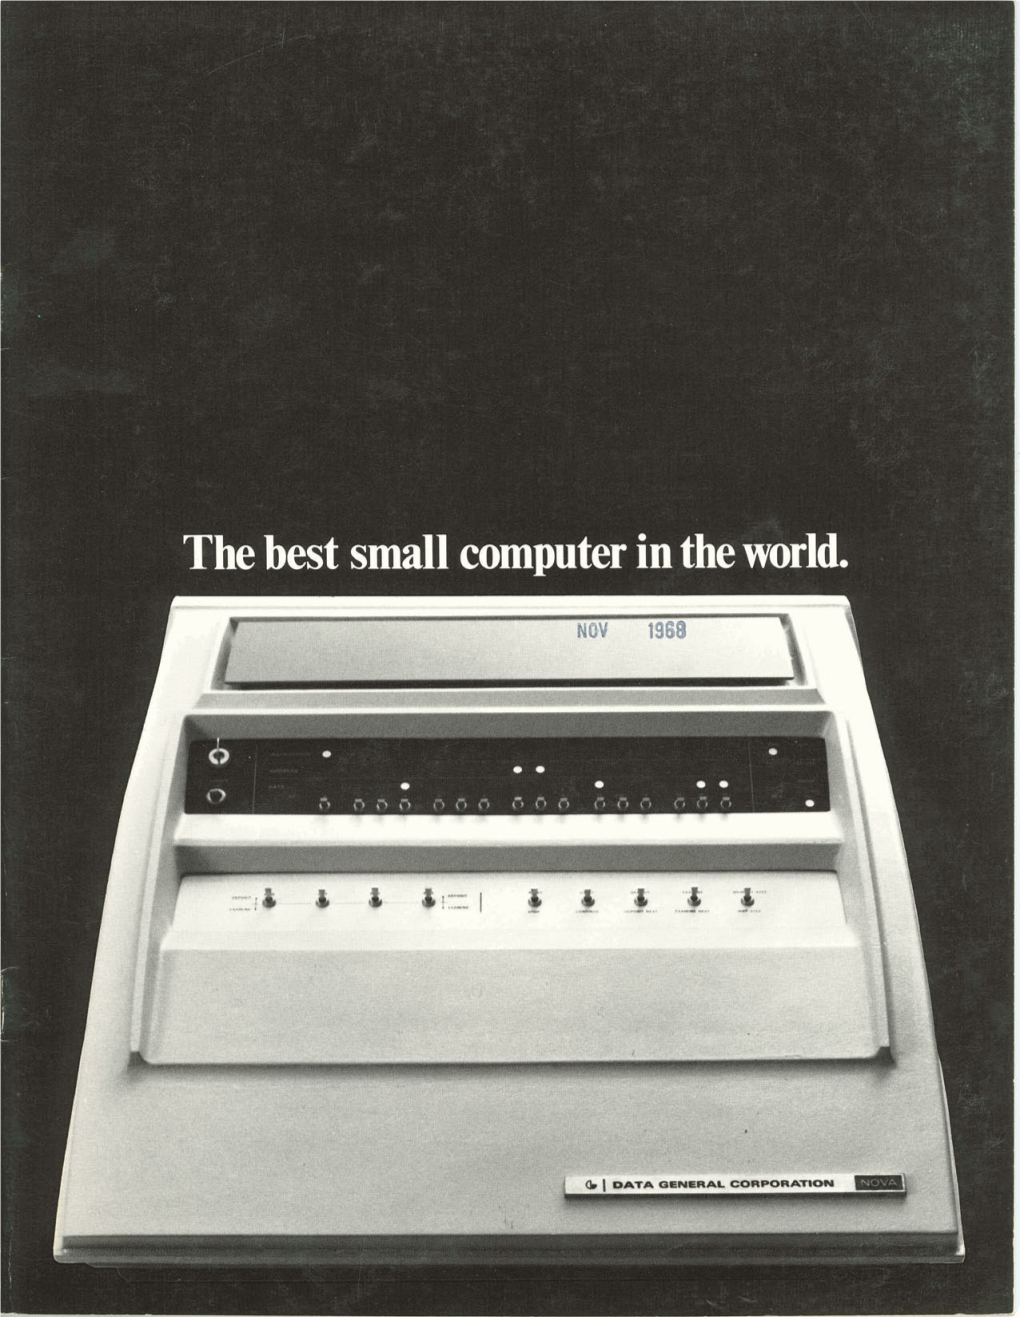 The Best Small Computer in the World, 1968